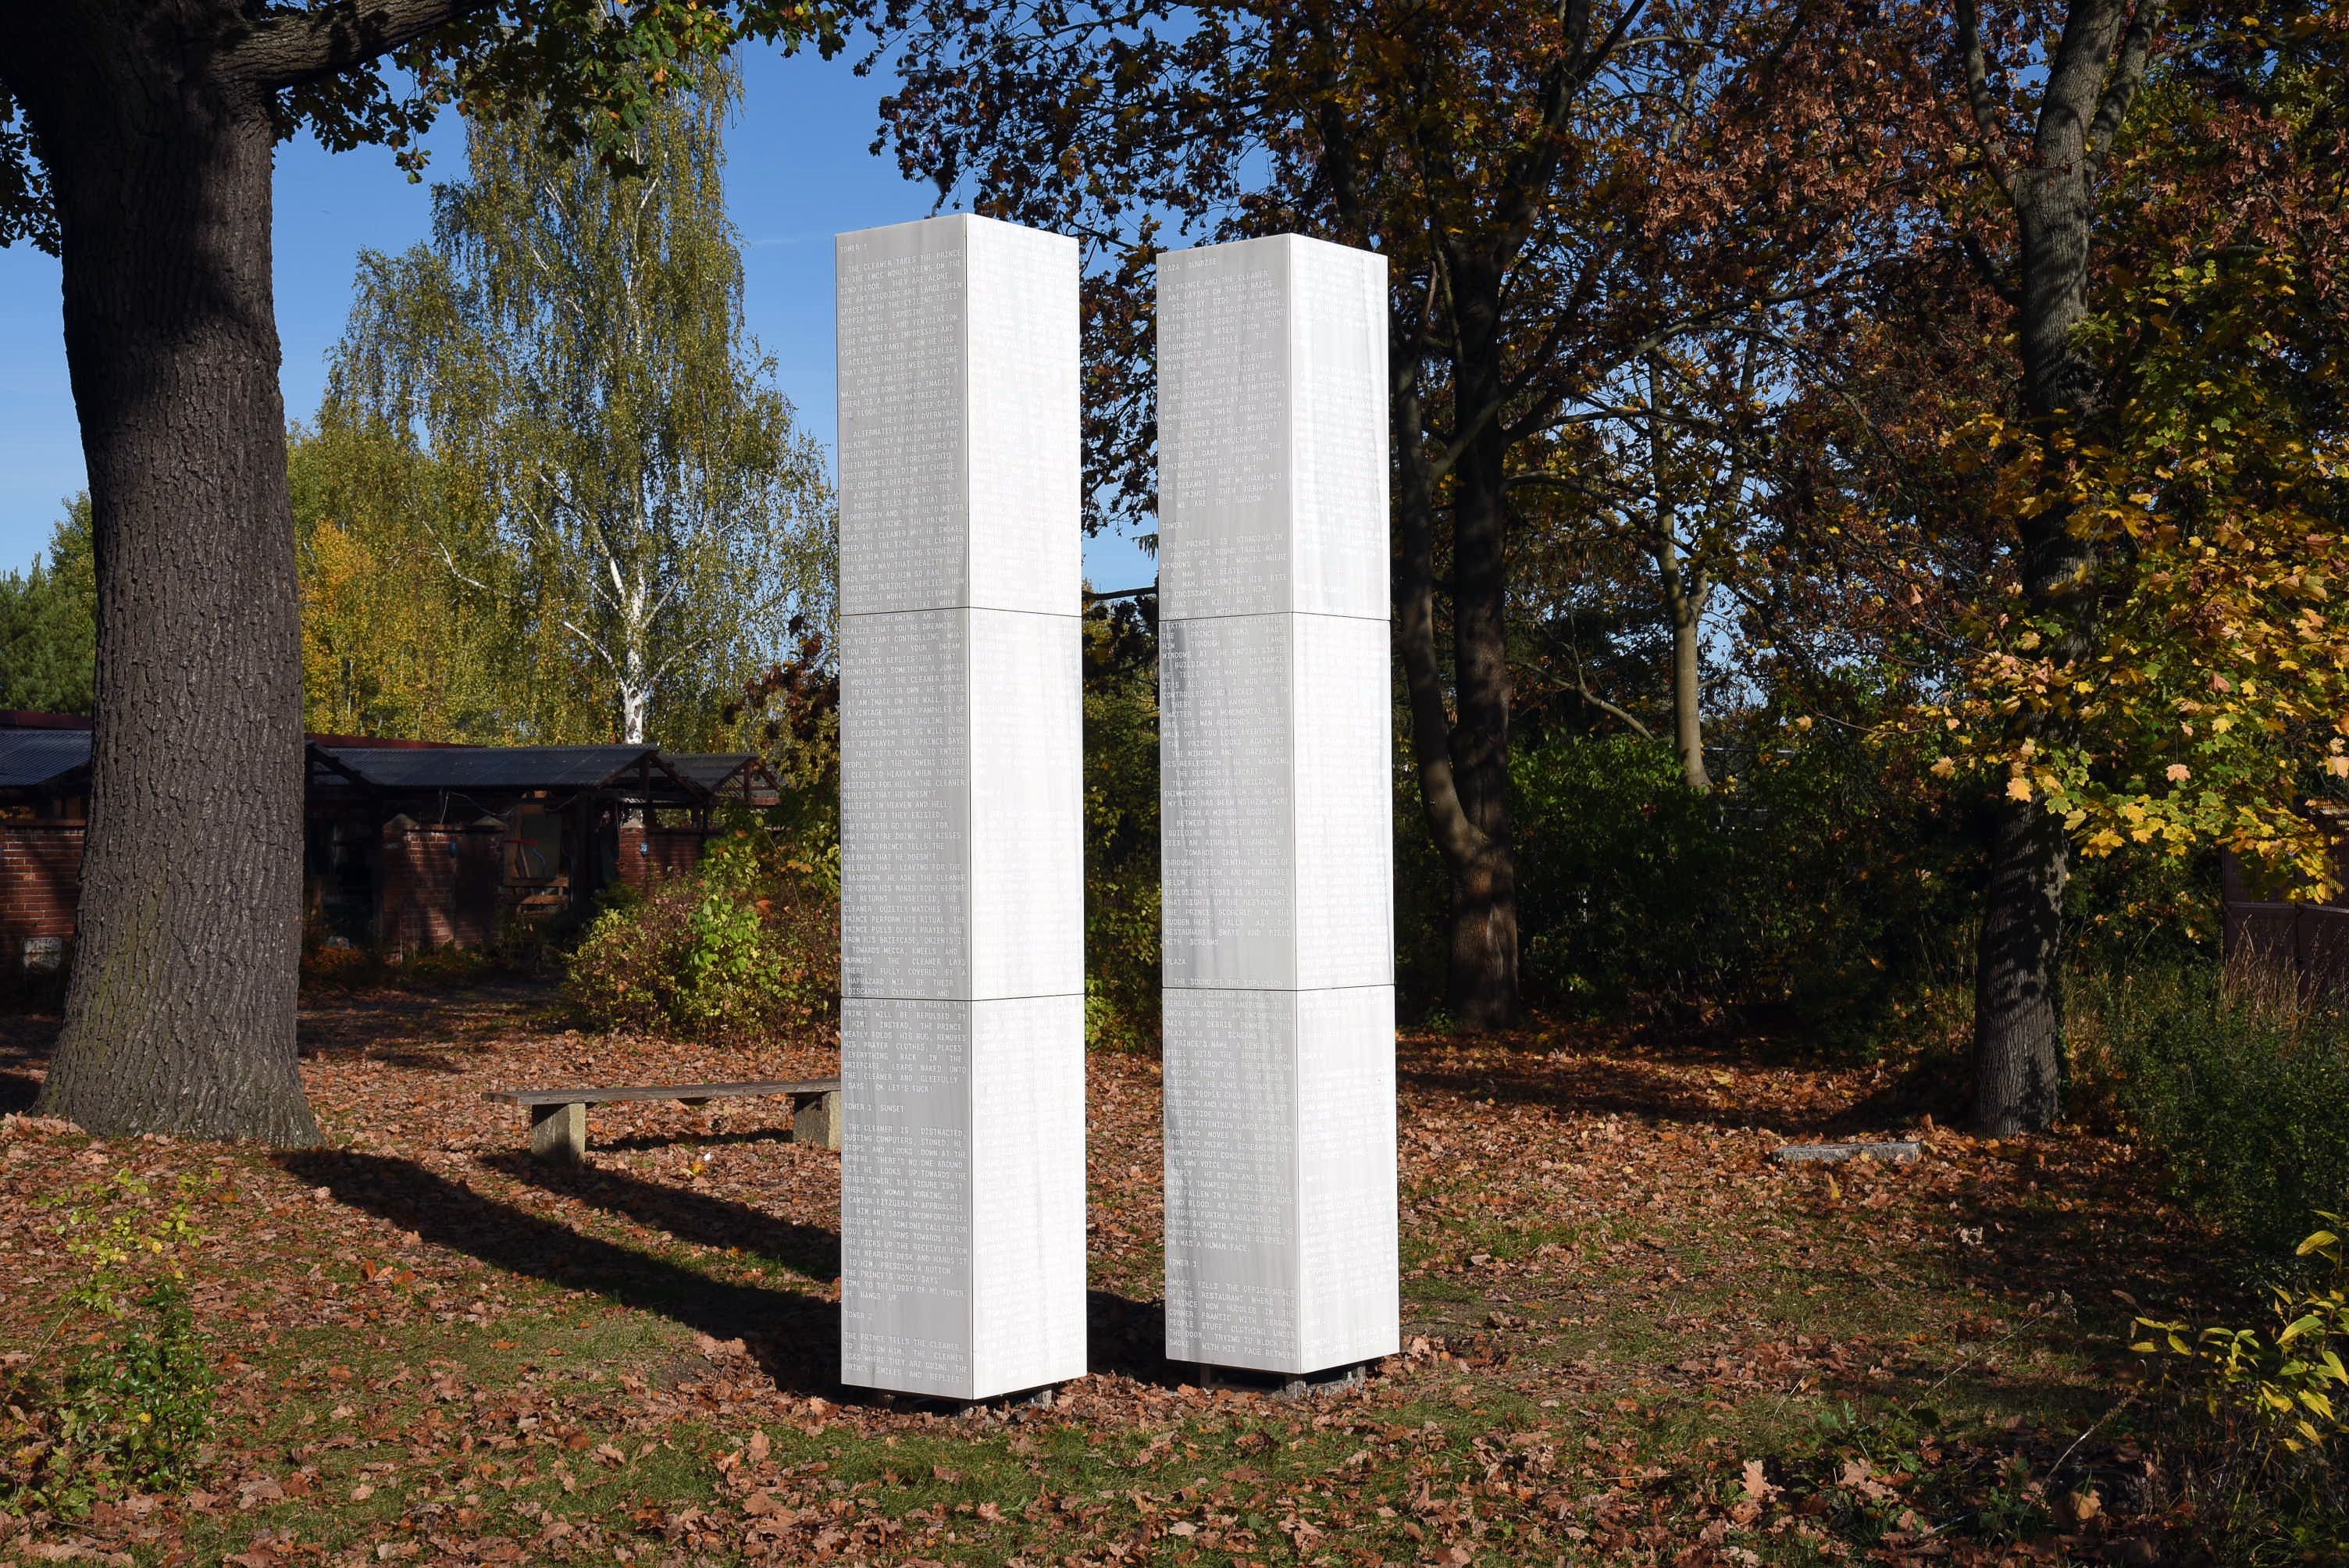 Installation view of the sculpture Tr@de World by Louis-Philippe Scoufaras in Germany